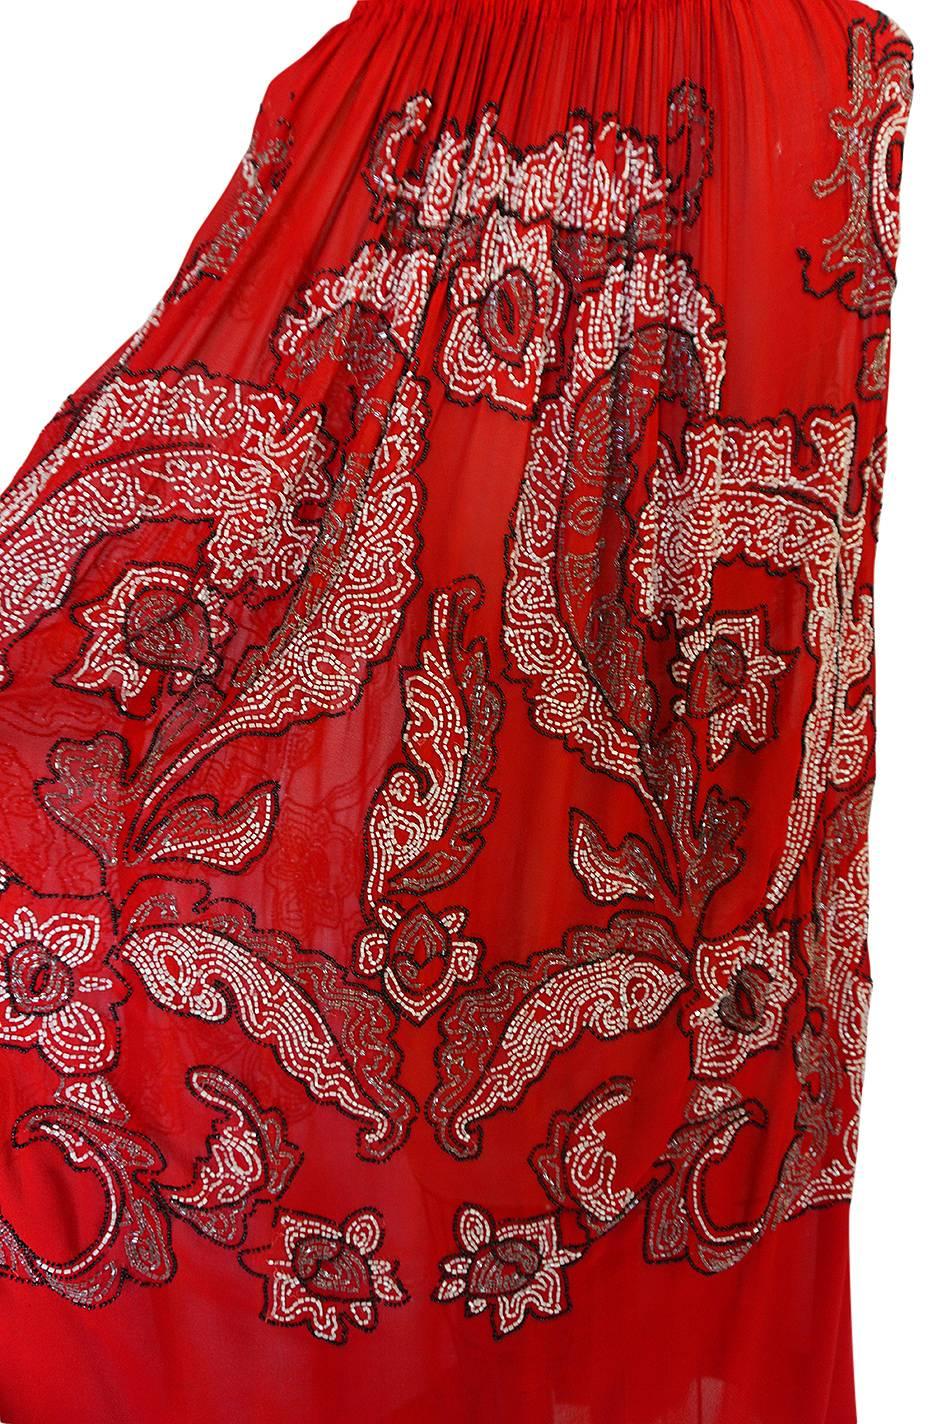 1920s House of Adair Densely Beaded Red Silk Cape 1